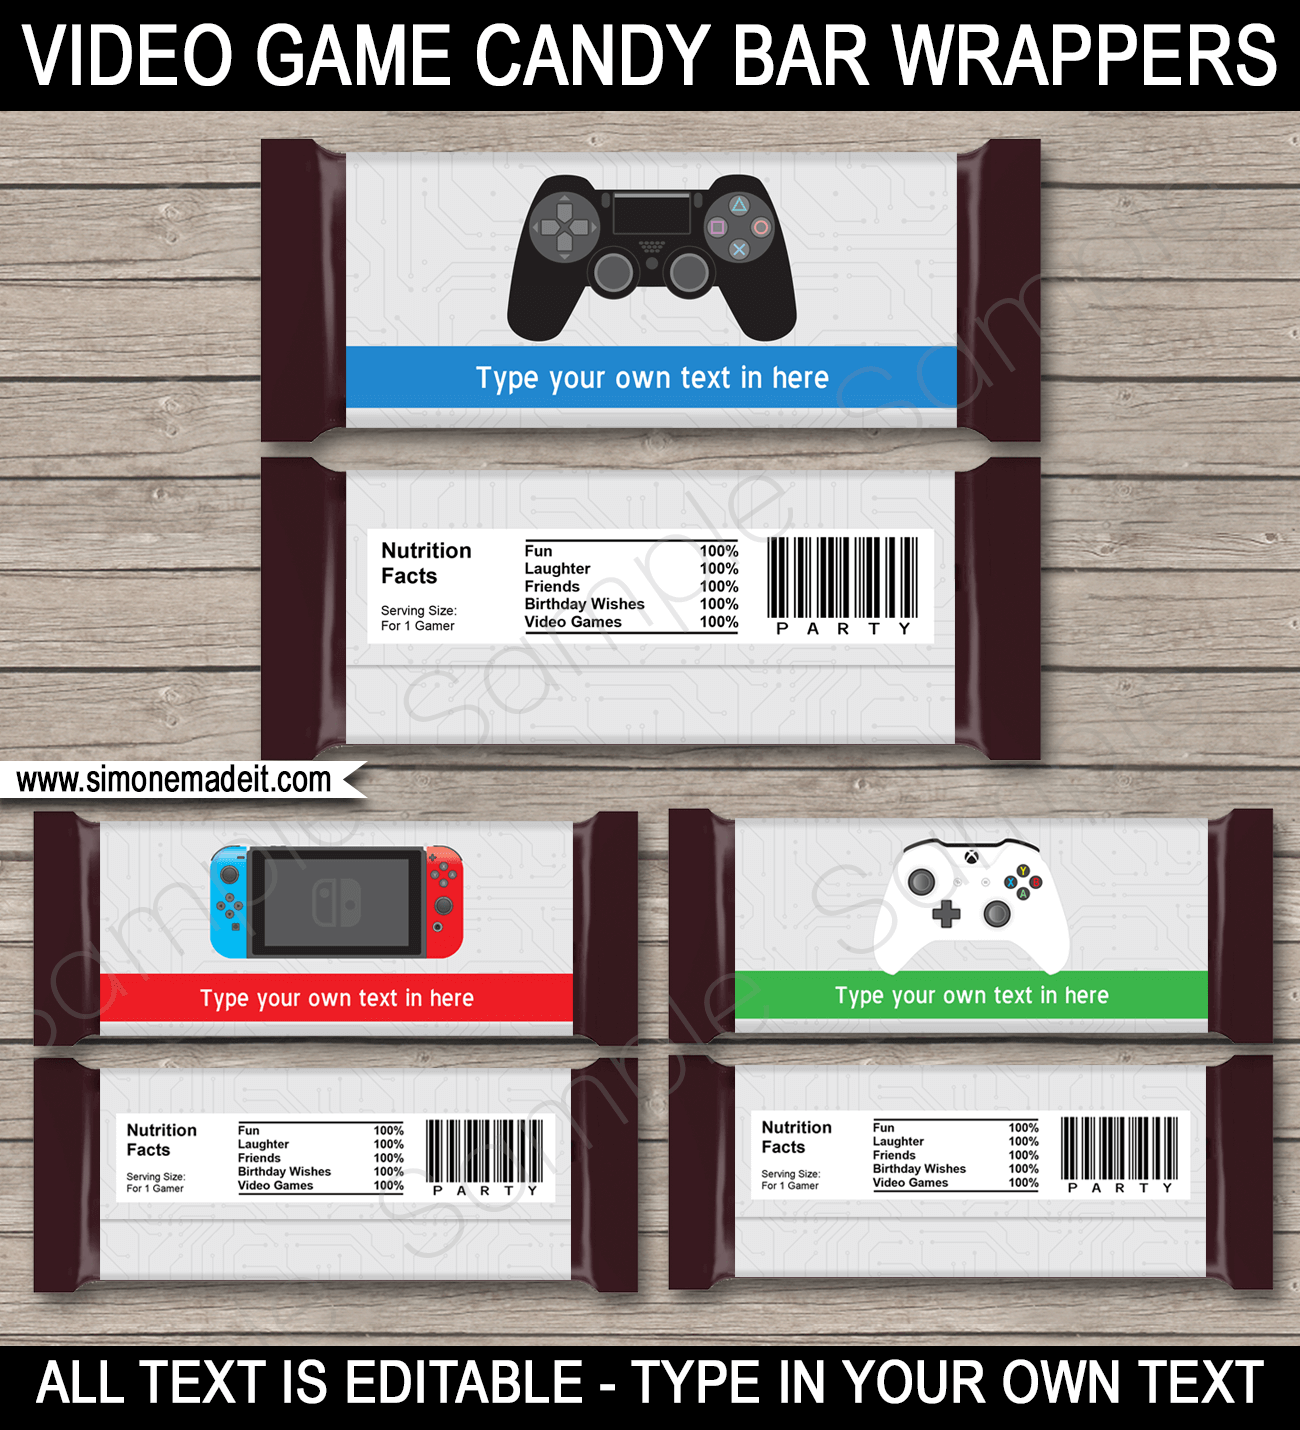 Video Game Theme Birthday Party Candy Bar Wrappers - Playstation Party Invitation, Nintendo Switch Party Invitation & Xbox Party Invitation - Editable & Printable DIY Templates - Instant download via simonemadeit.com